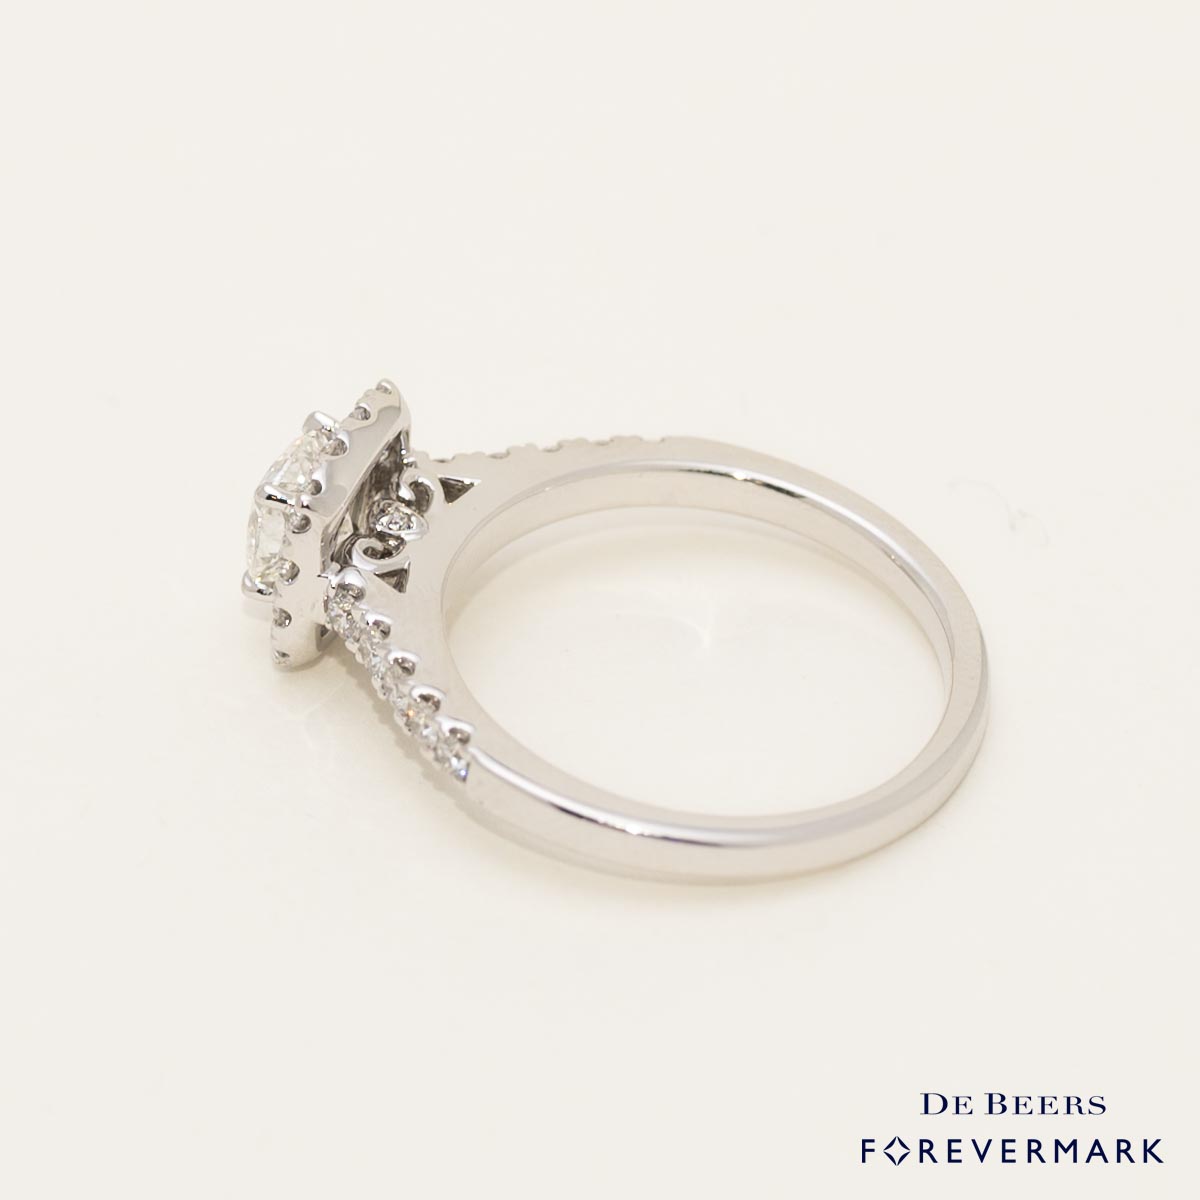 De Beers Forevermark Cushion Diamond Halo Engagement Ring in 14kt White Gold (1ct tw)